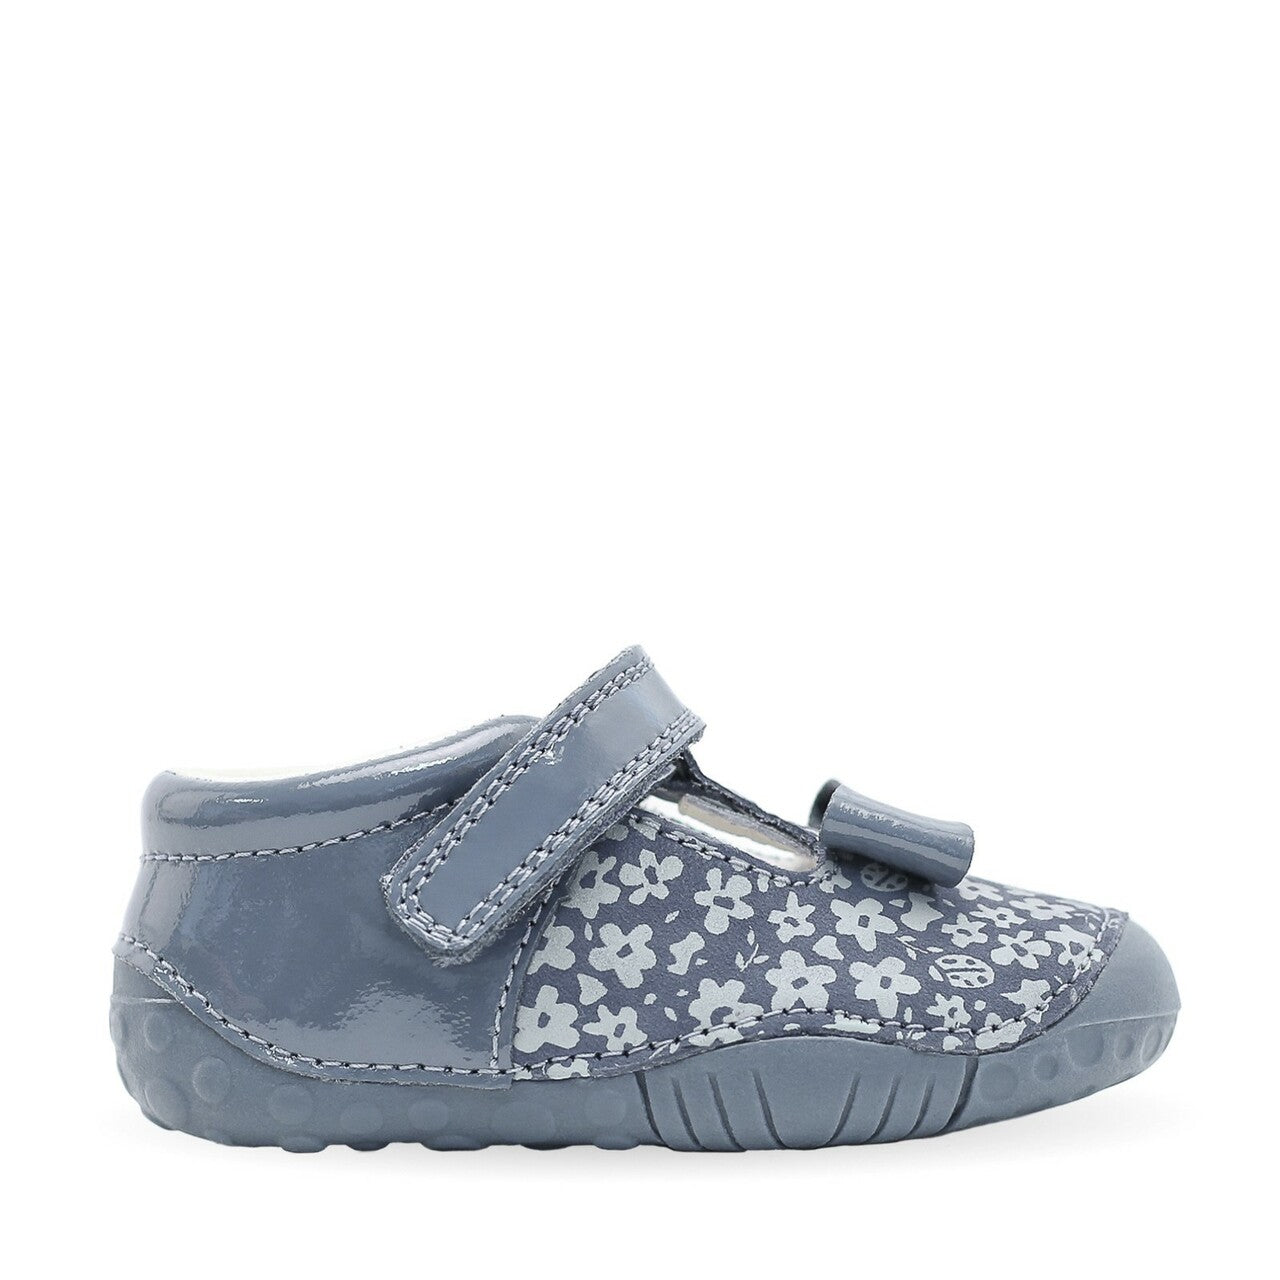 A girls T Bar pre walker by Start Rite, style Wiggle, in blue nubuck and patent leather with velcro fastening. Right side view.